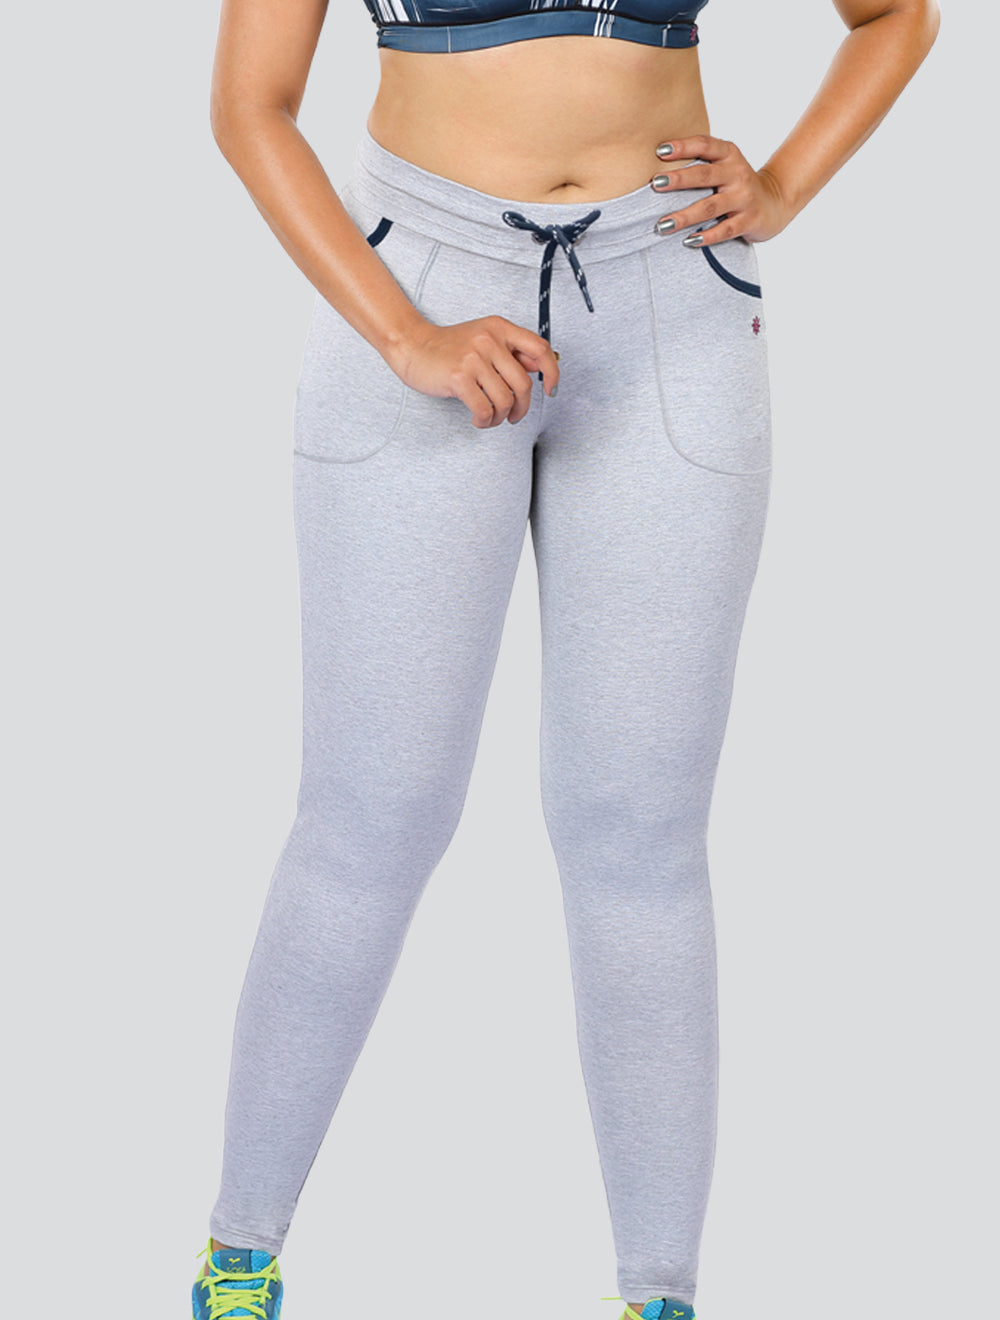 Womens Activewear  Gilly Hicks